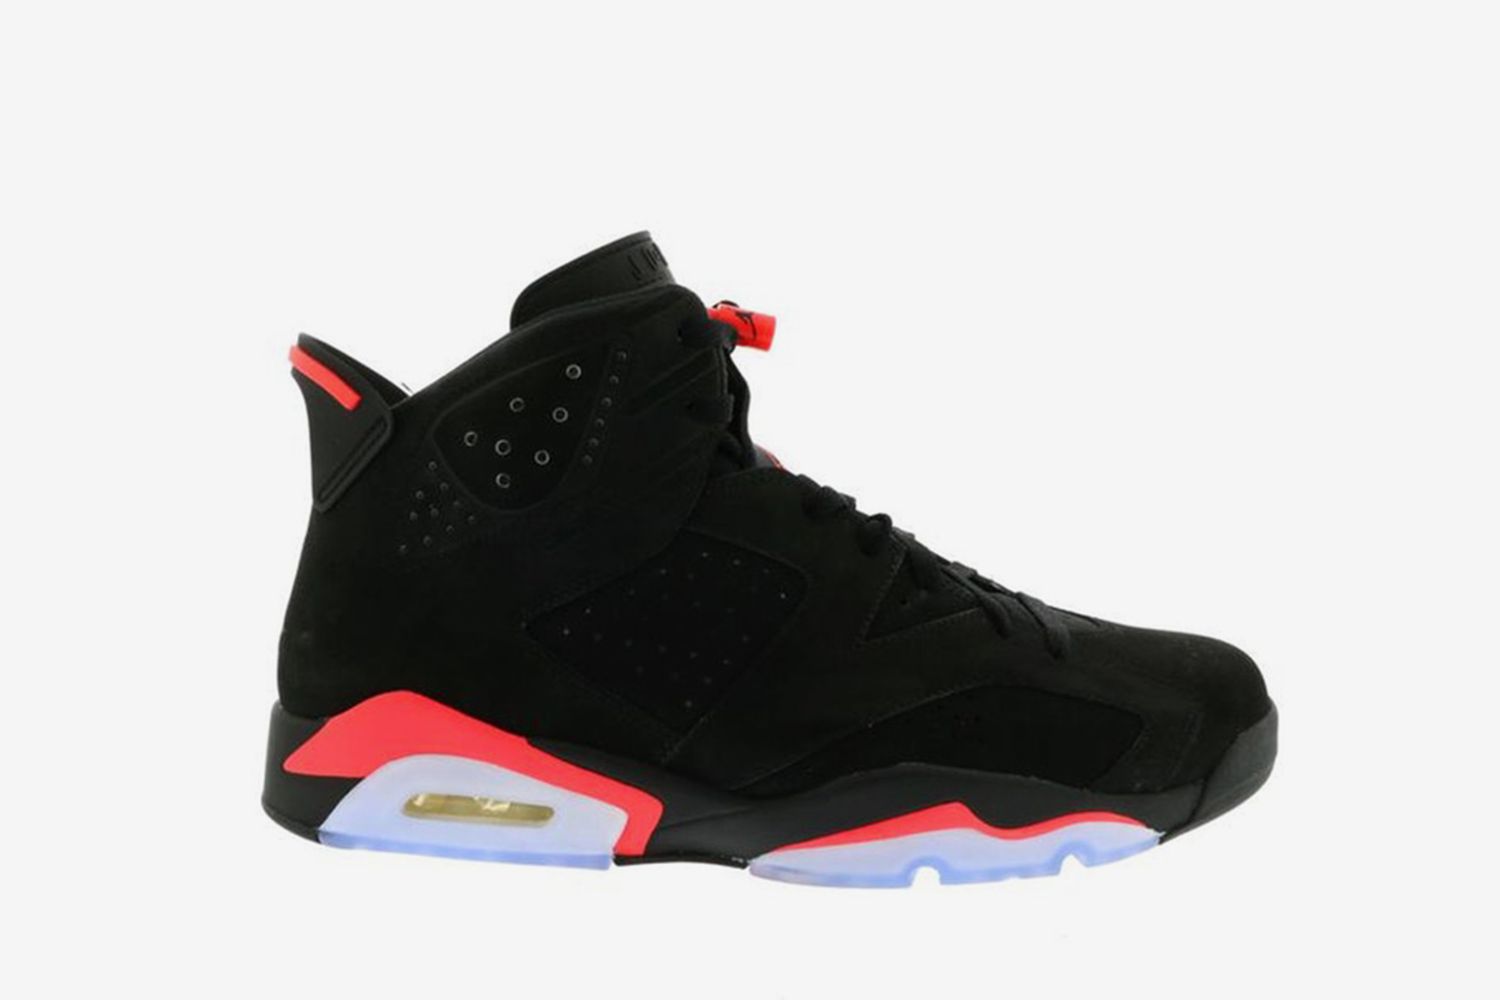 Tochi tree reflect Philosophical Air Jordan 6 "Infrared" | Cop Your Pair at StockX